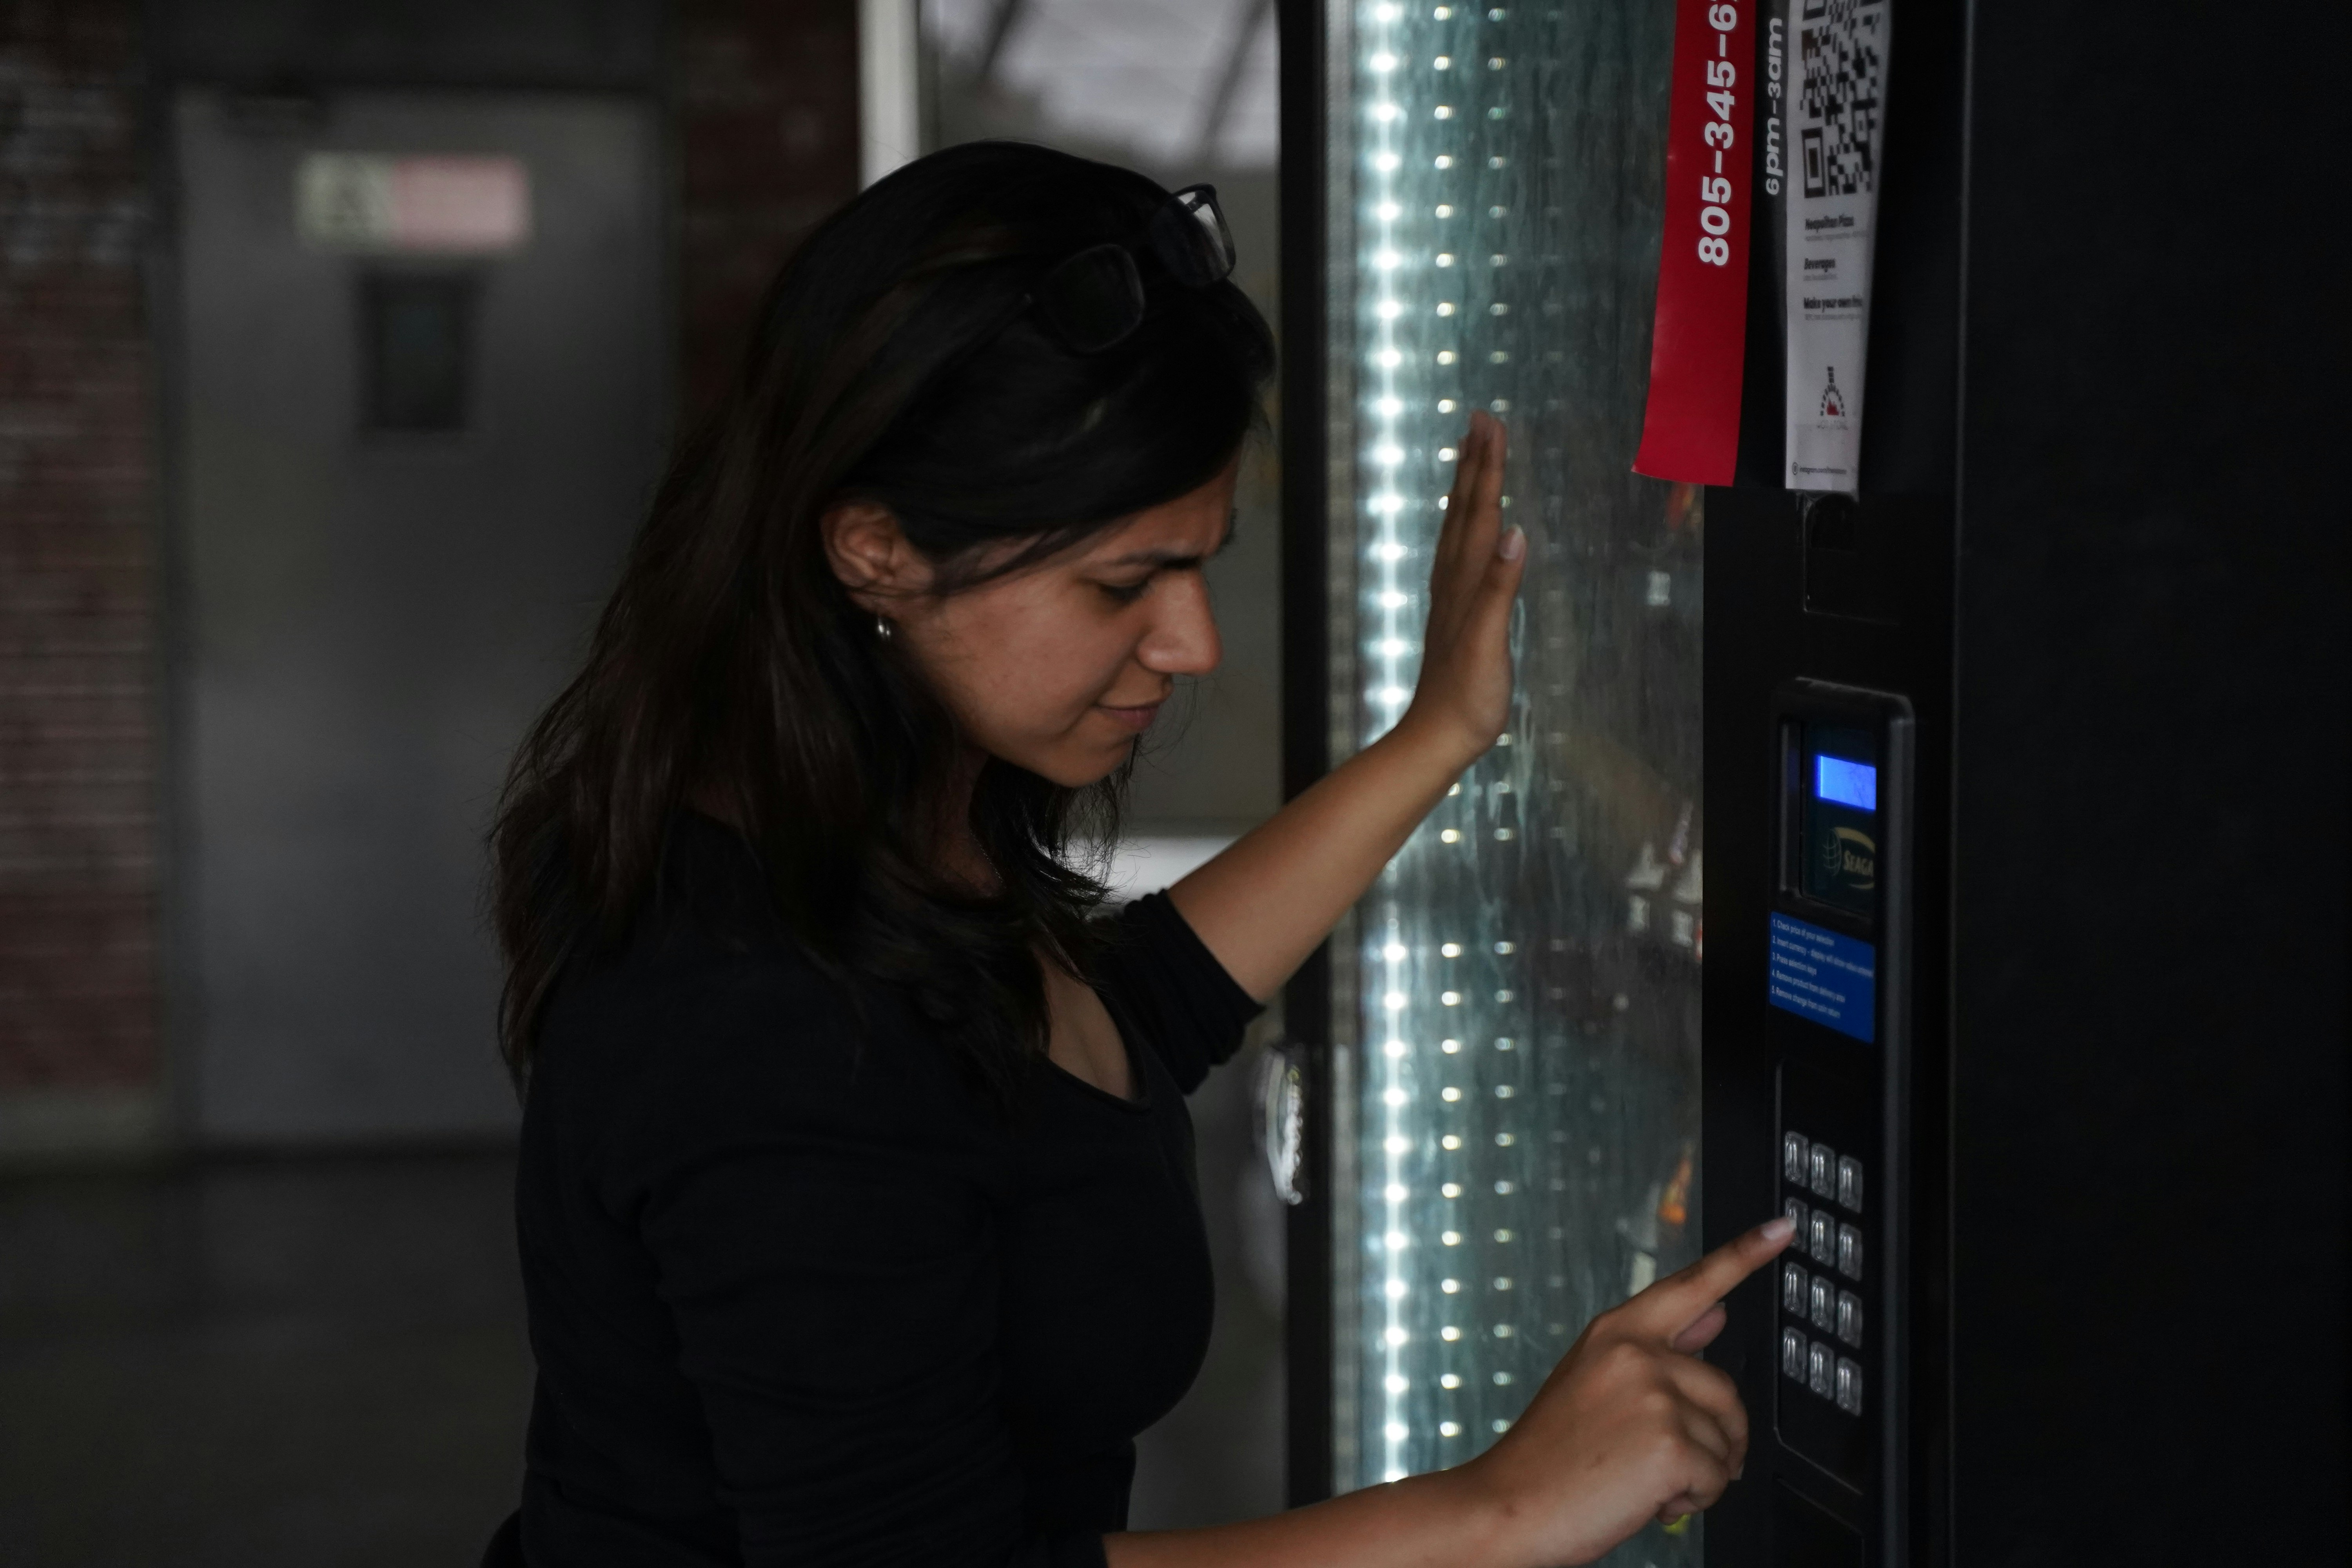 A girl using the vending machine. Theme: Impatience.